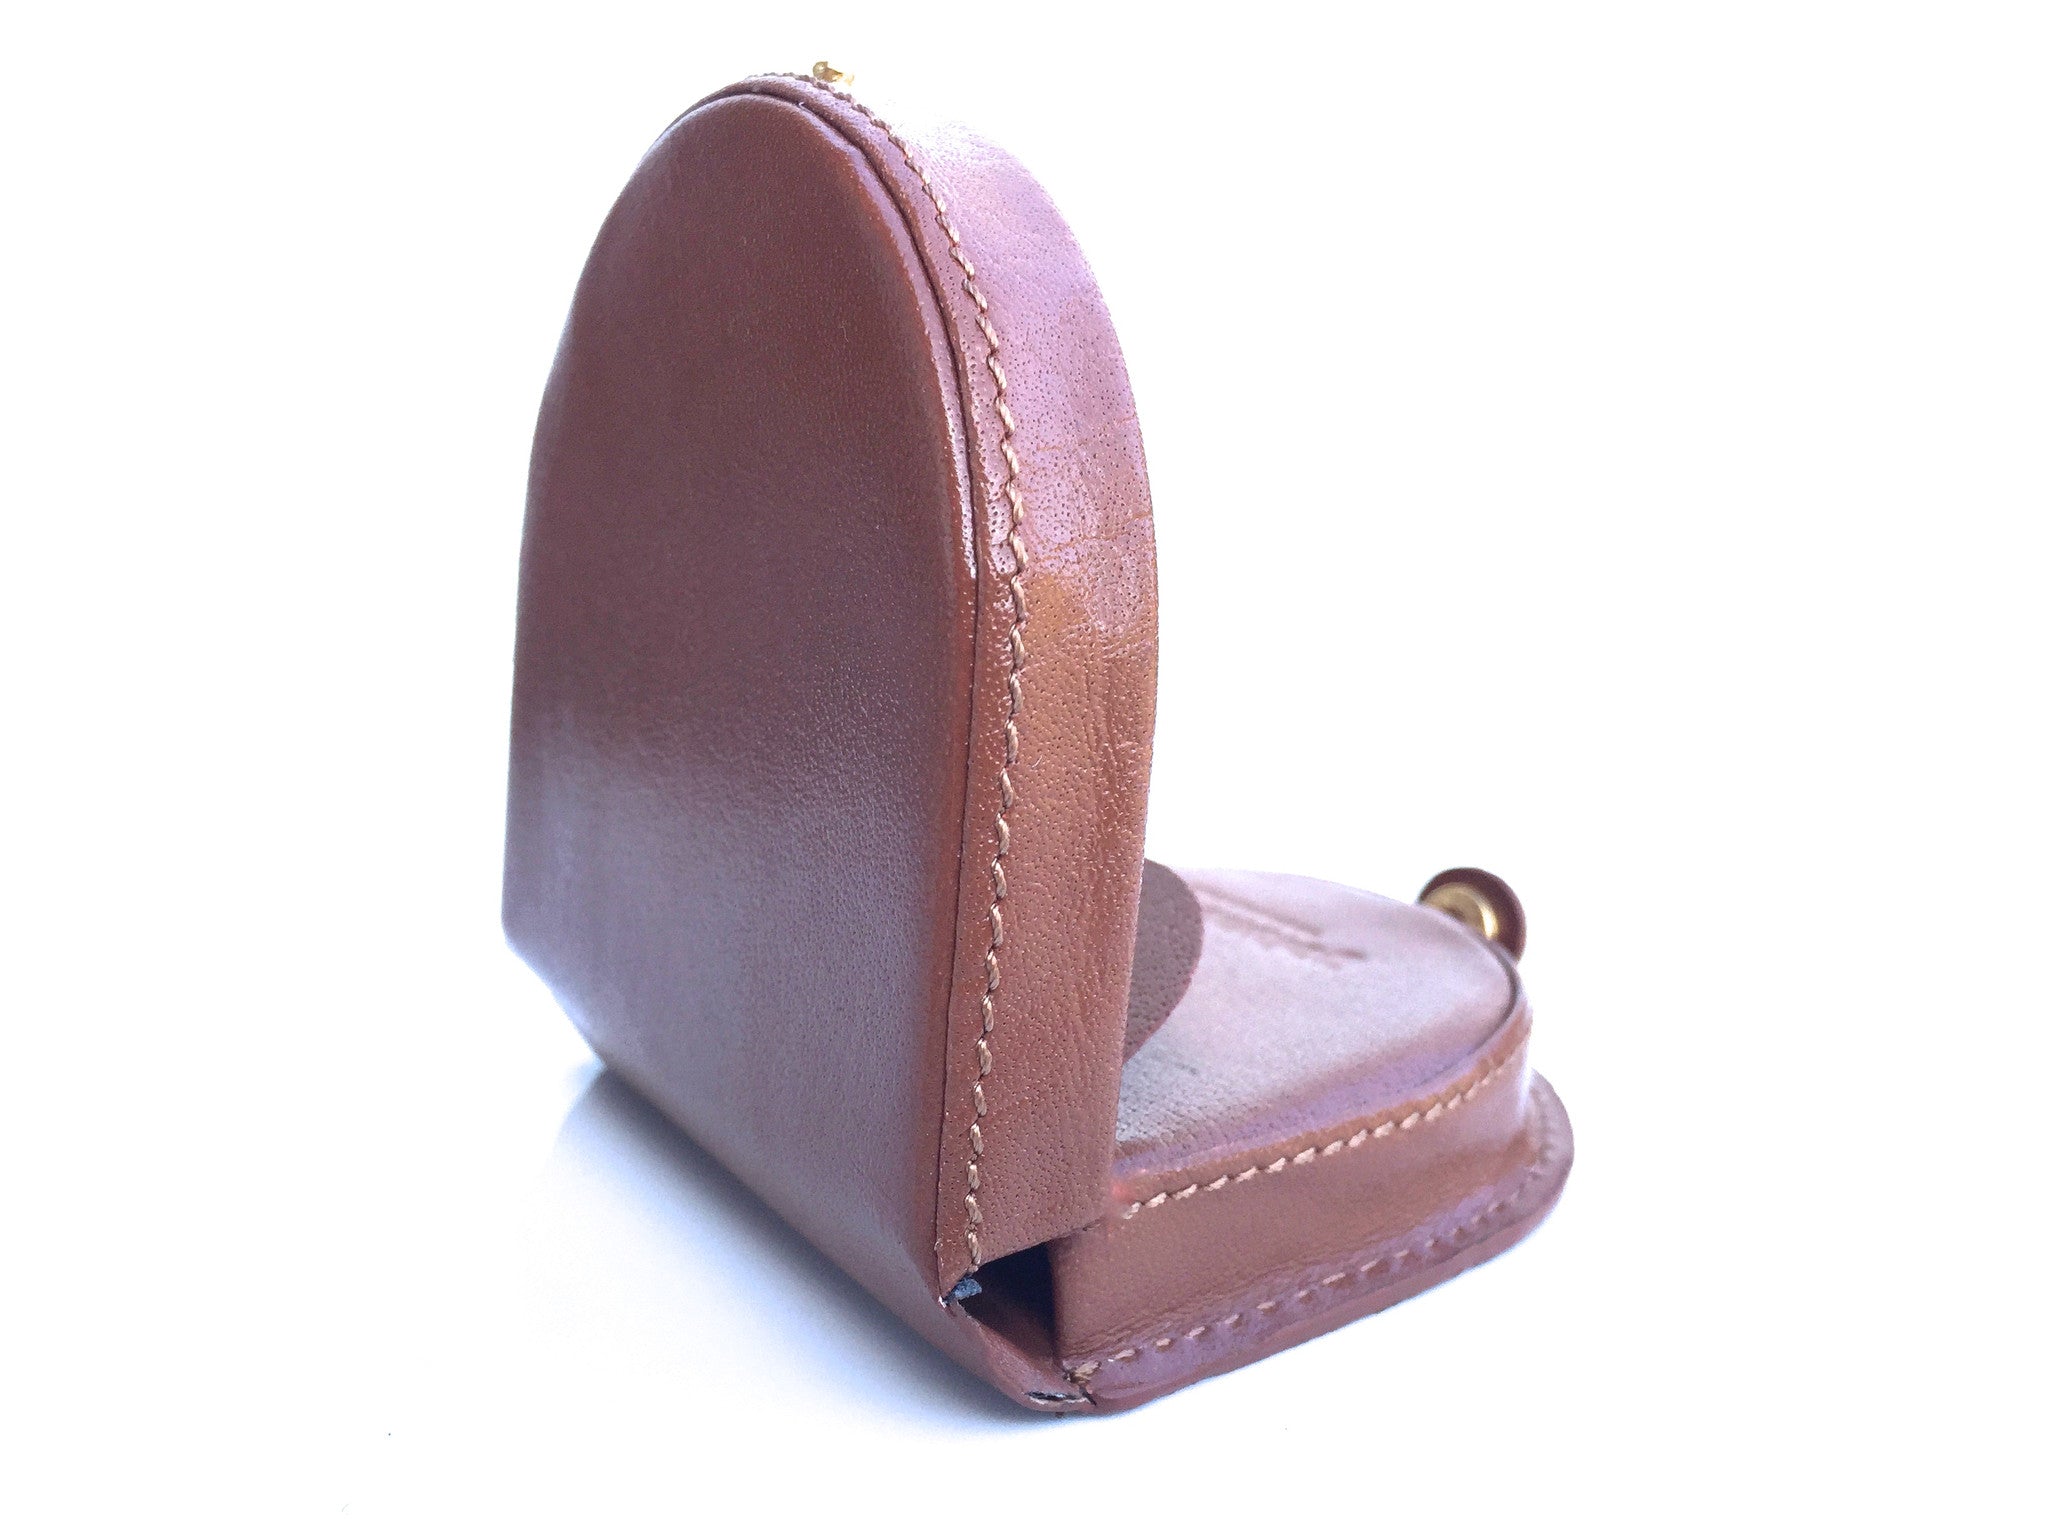 Style 143: Mens Leather Horseshoe Coin Tray Purse In Tan By Golunski - Baked Apple WM Ltd